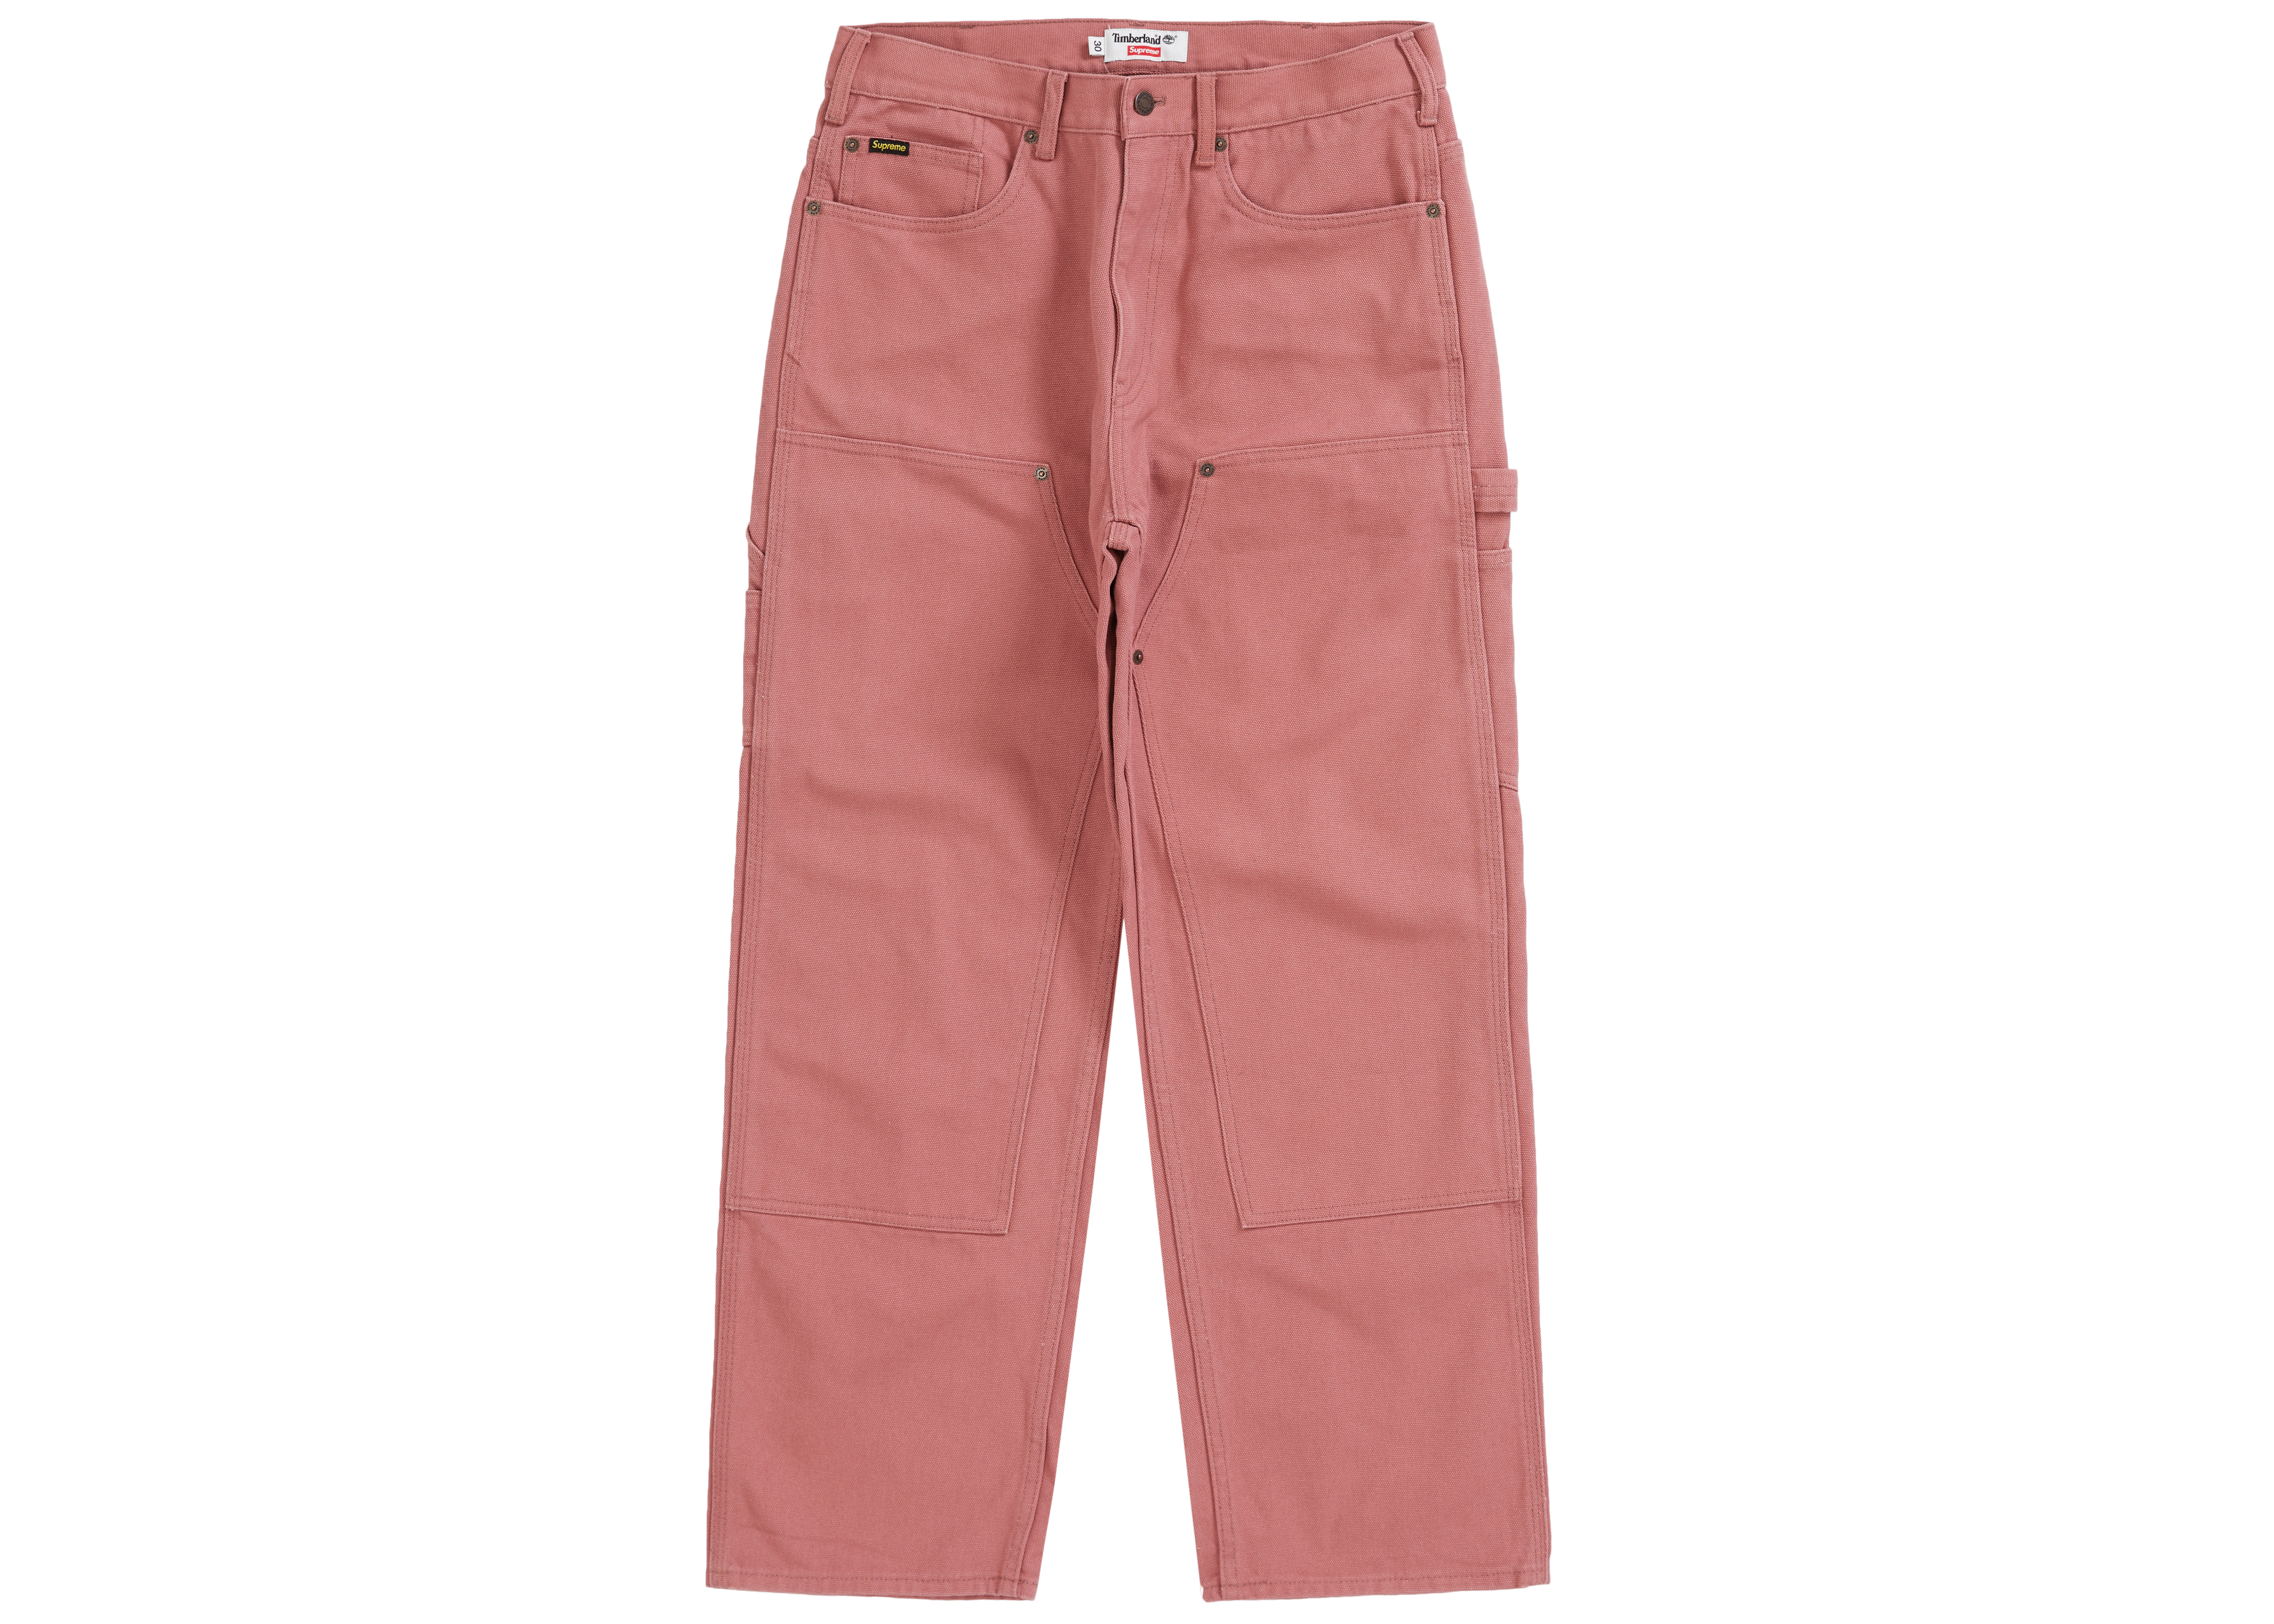 Supreme Timberland Double Knee Painter Pant Dusty Red - SS21